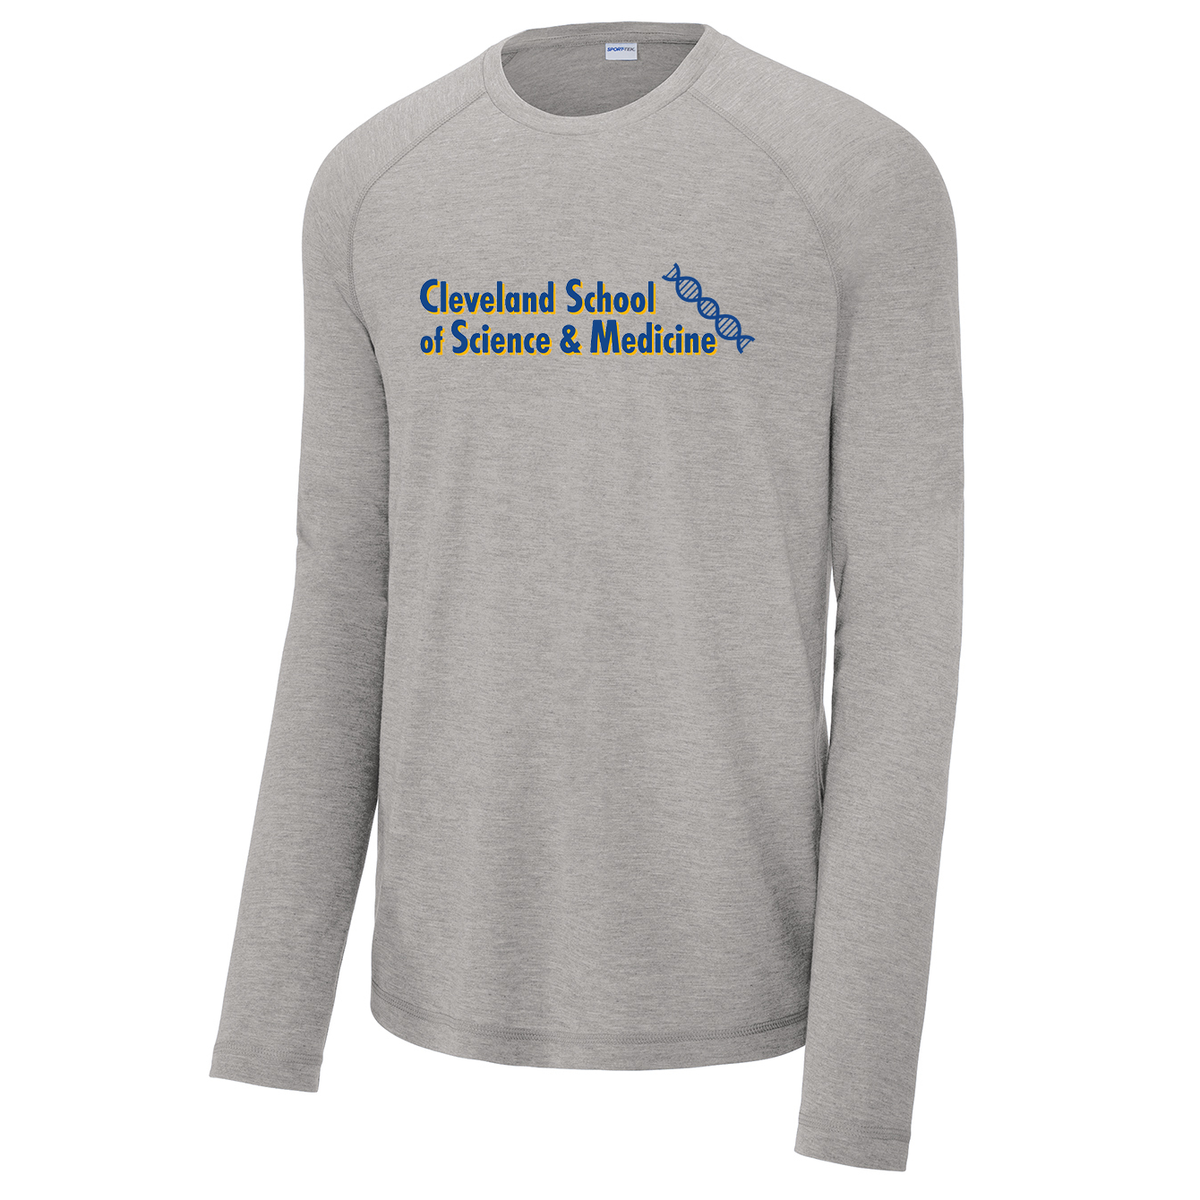 Cleveland School of Science and Medicine Long Sleeve Raglan CottonTouch